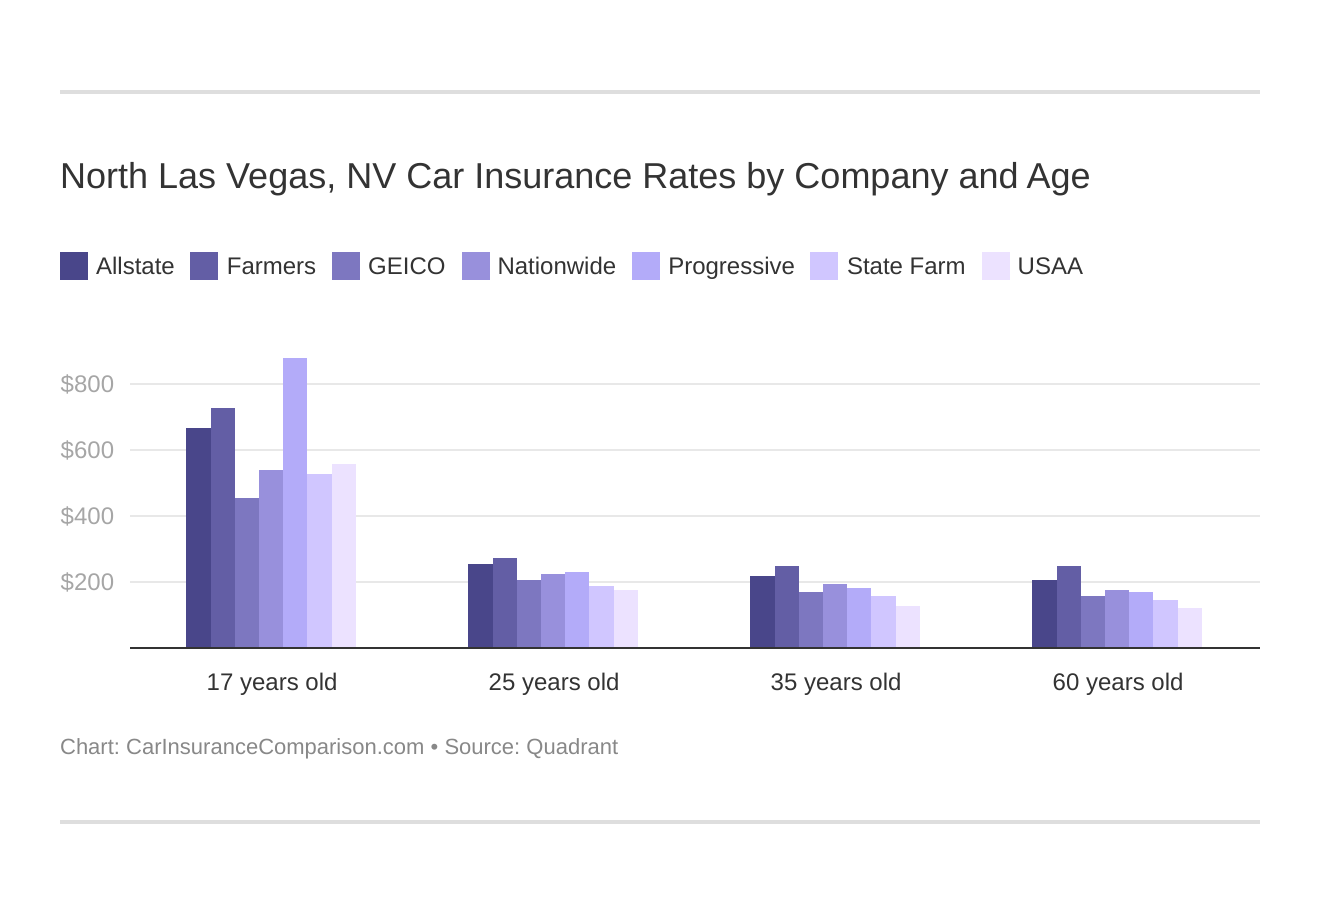 North Las Vegas, NV Car Insurance Rates by Company and Age